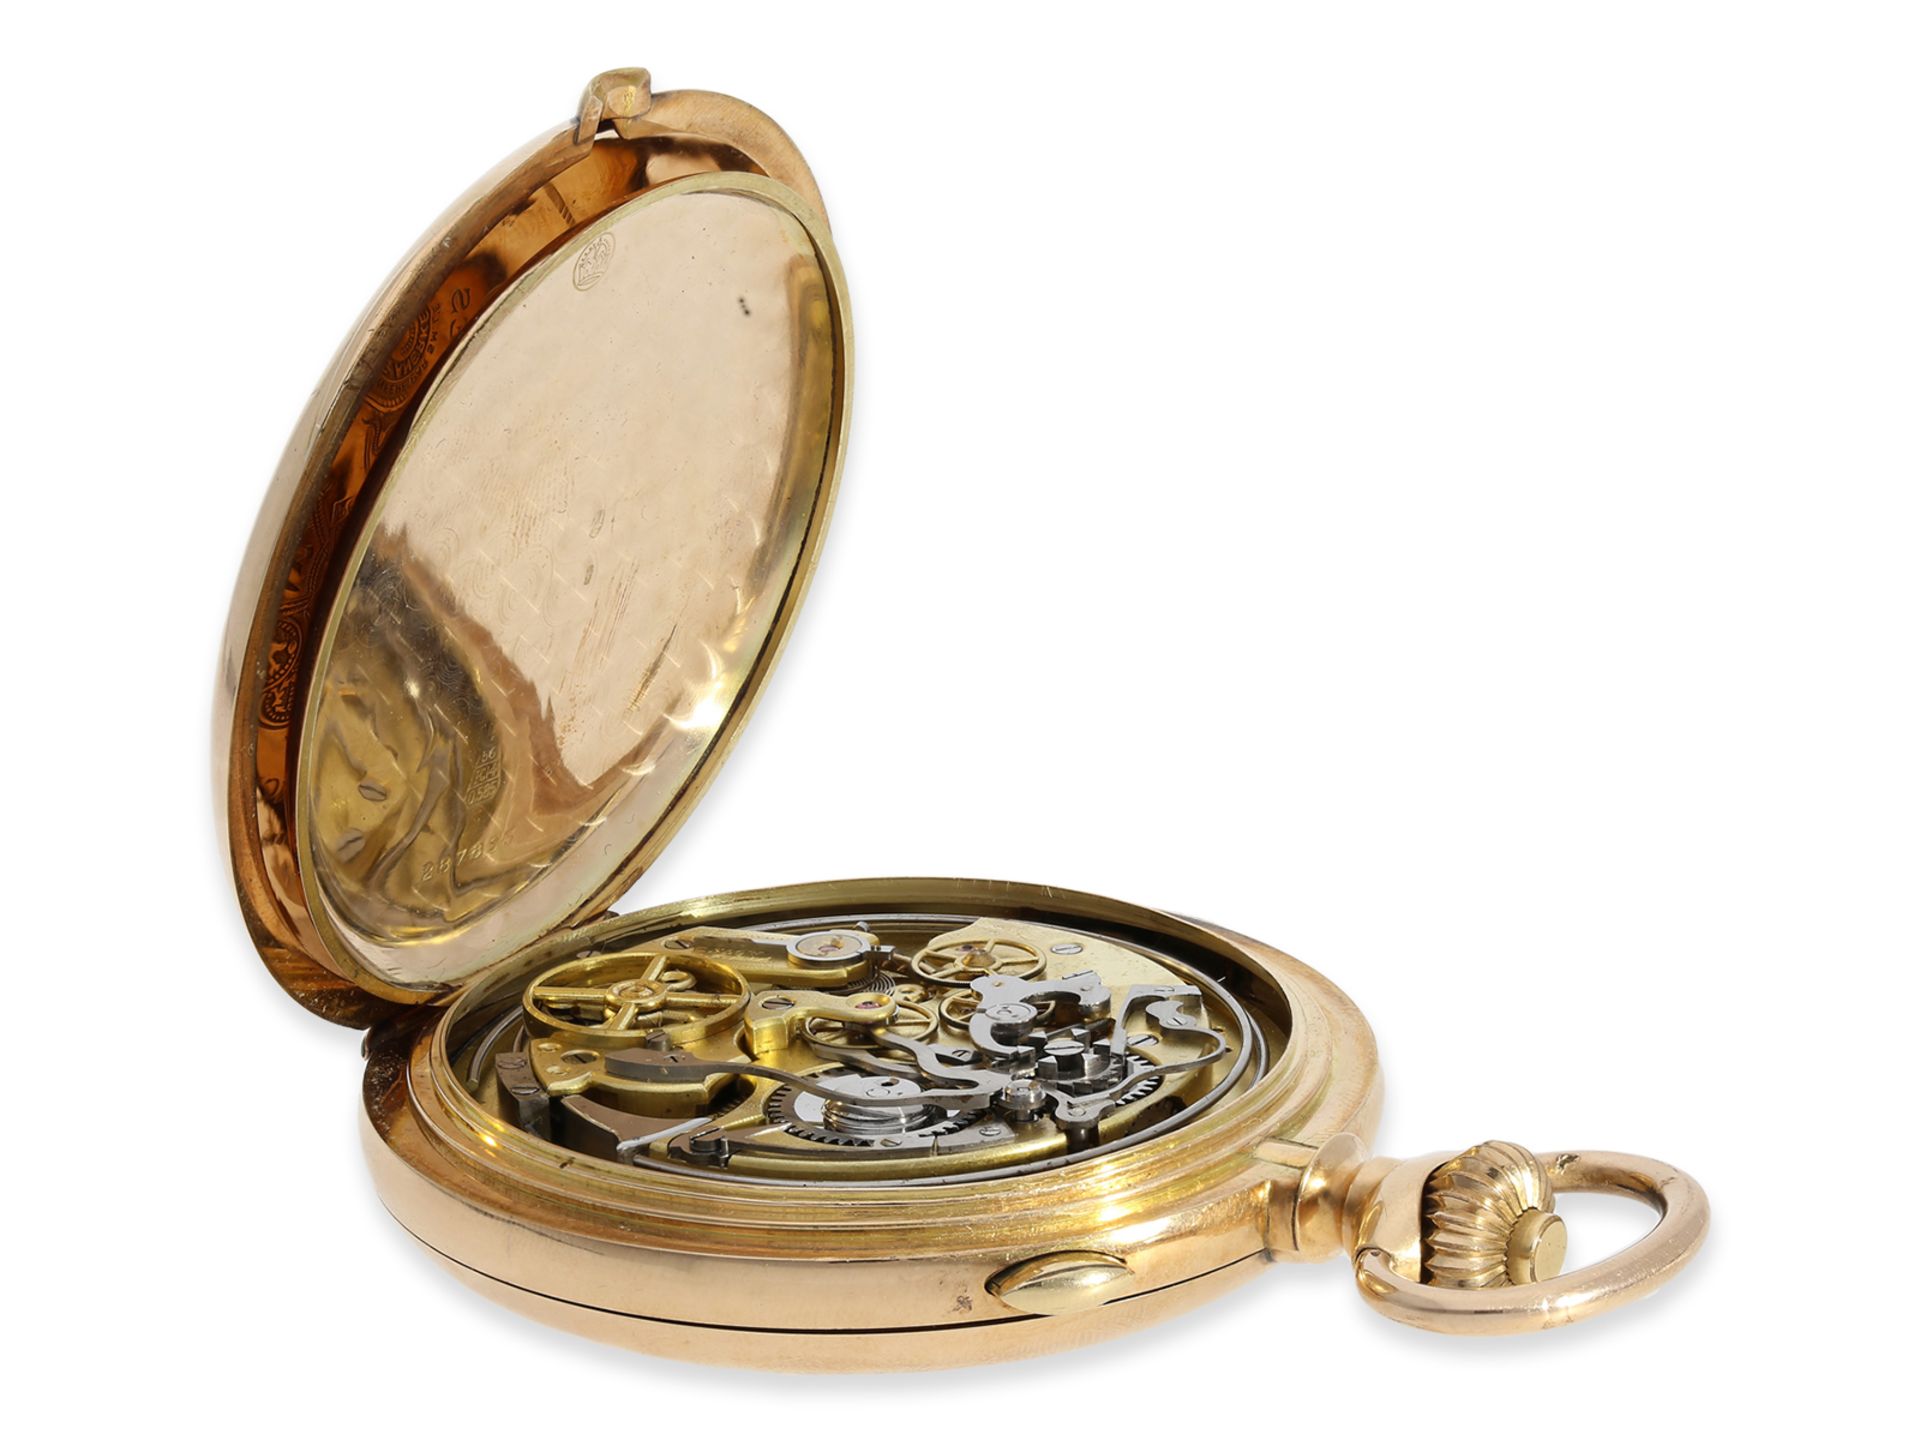 Pocket watch: impressive gold hunting case watch with repeater and chronograph, Audemars Freres Gene - Image 4 of 8